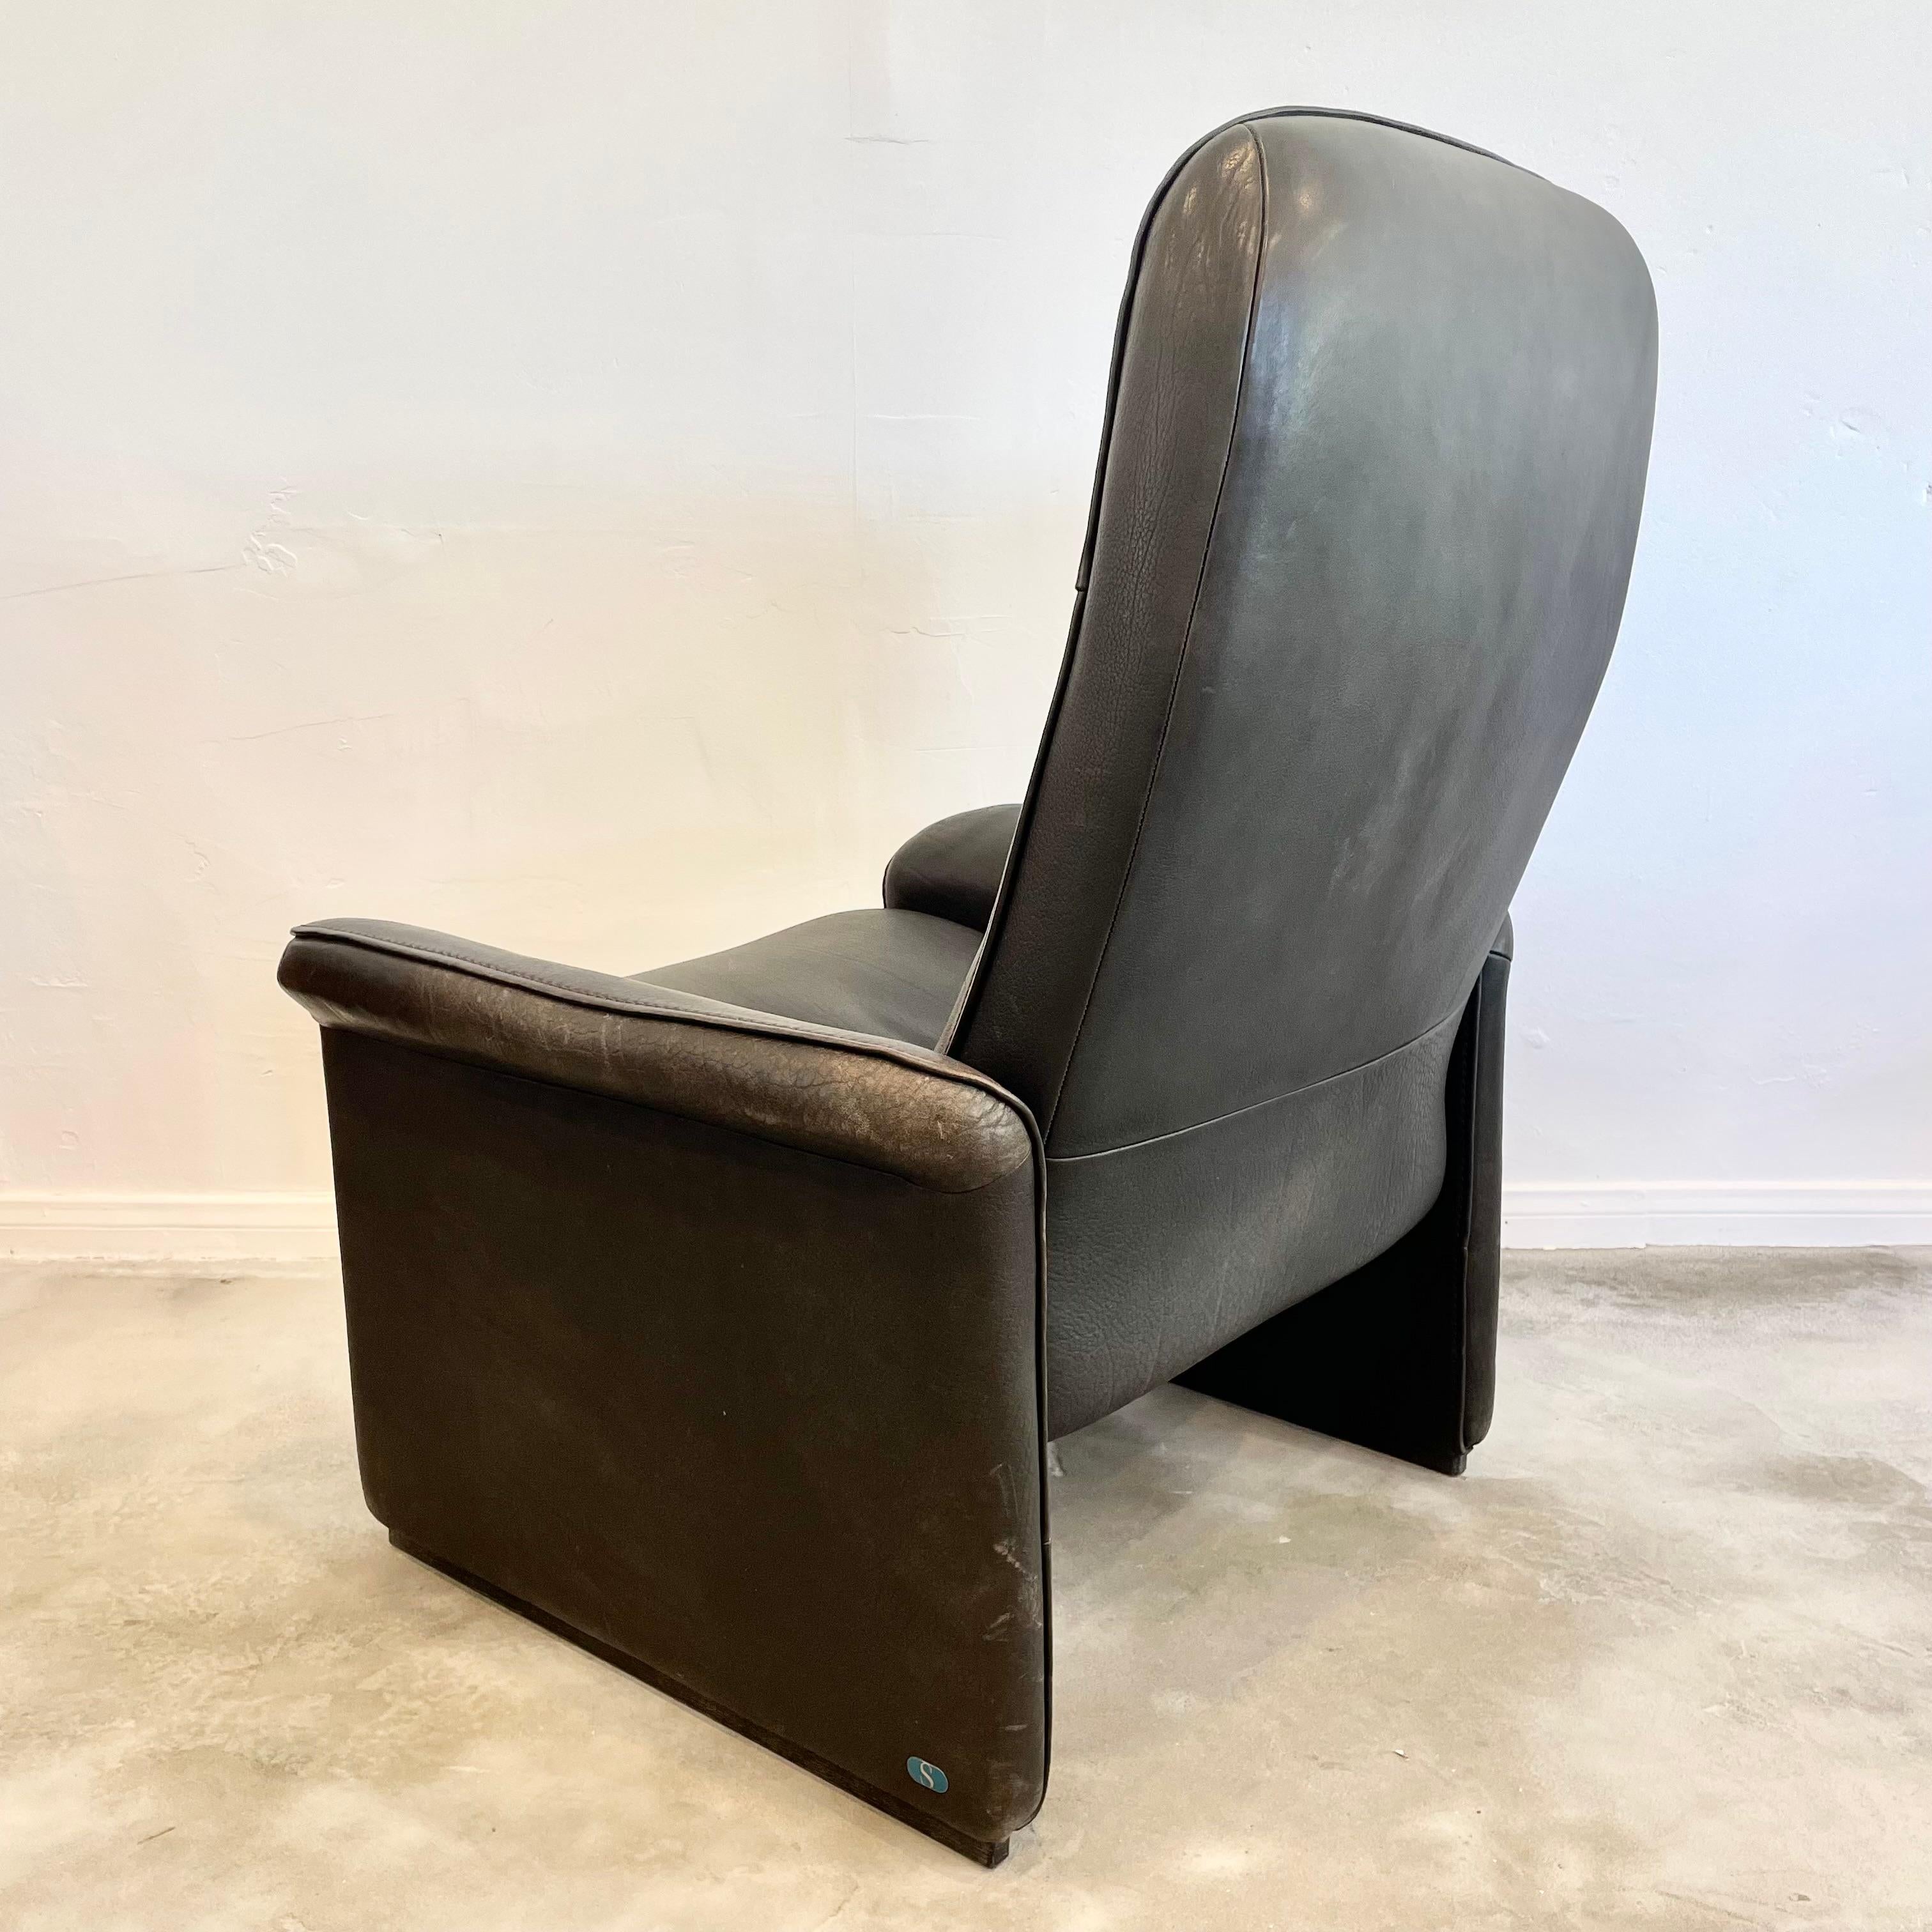 Late 20th Century Pair of De Sede DS-50 Black Leather Recliner Chairs, 1970s Switzerland For Sale